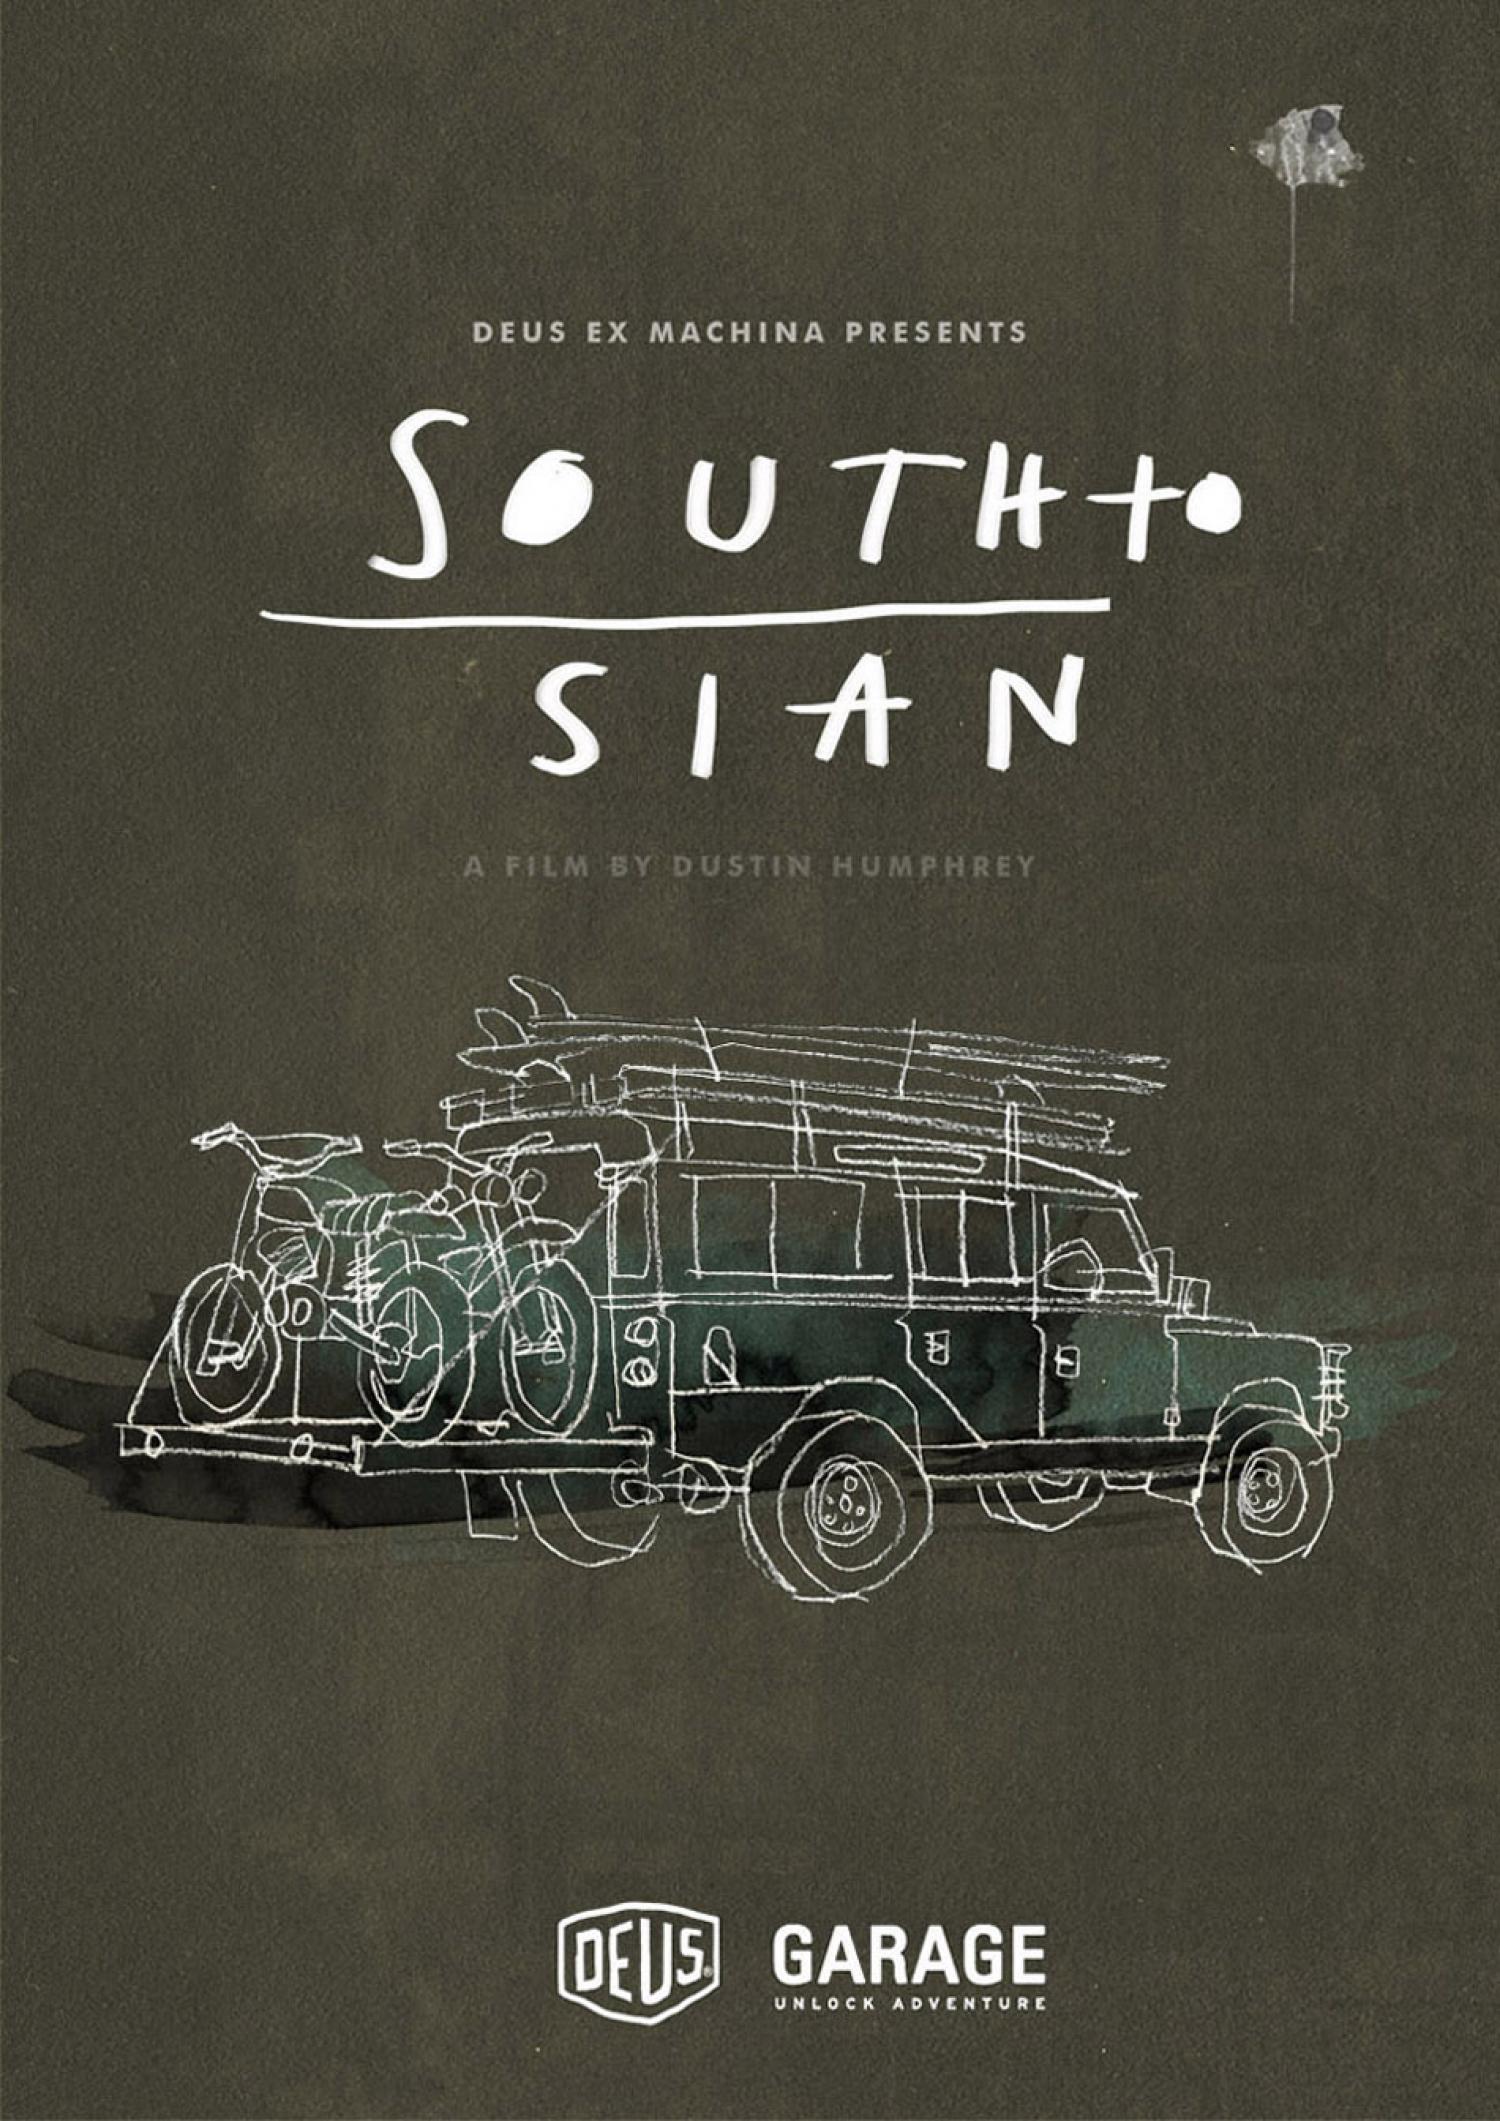 「SOUTH TO SIAN」